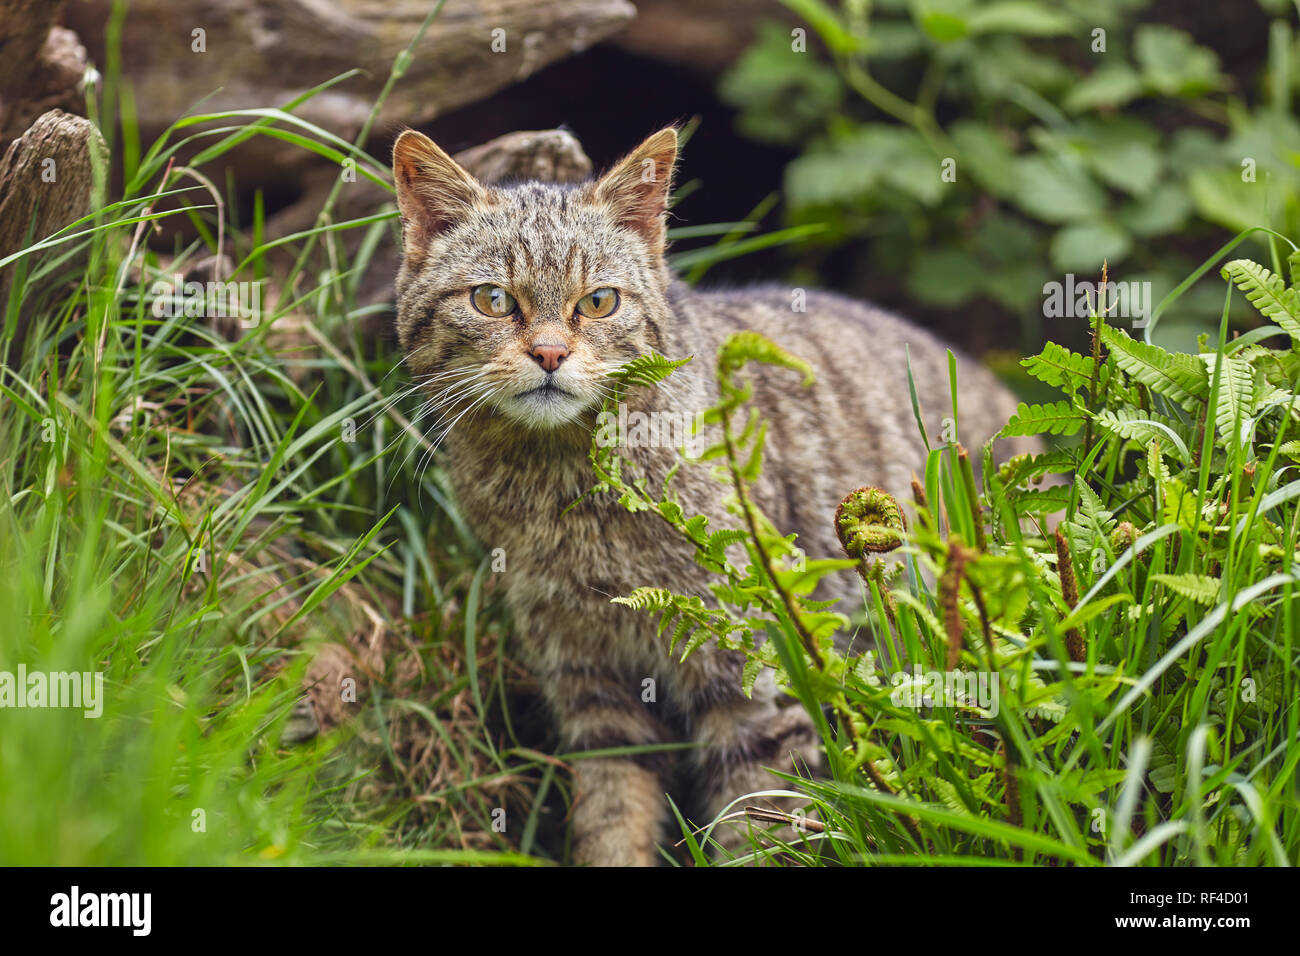 Portrait of a Scottish Wildcat, Felis silvestris silvestris, at a captive breeding centred aimed at protecting this endangered species from extinction Stock Photo